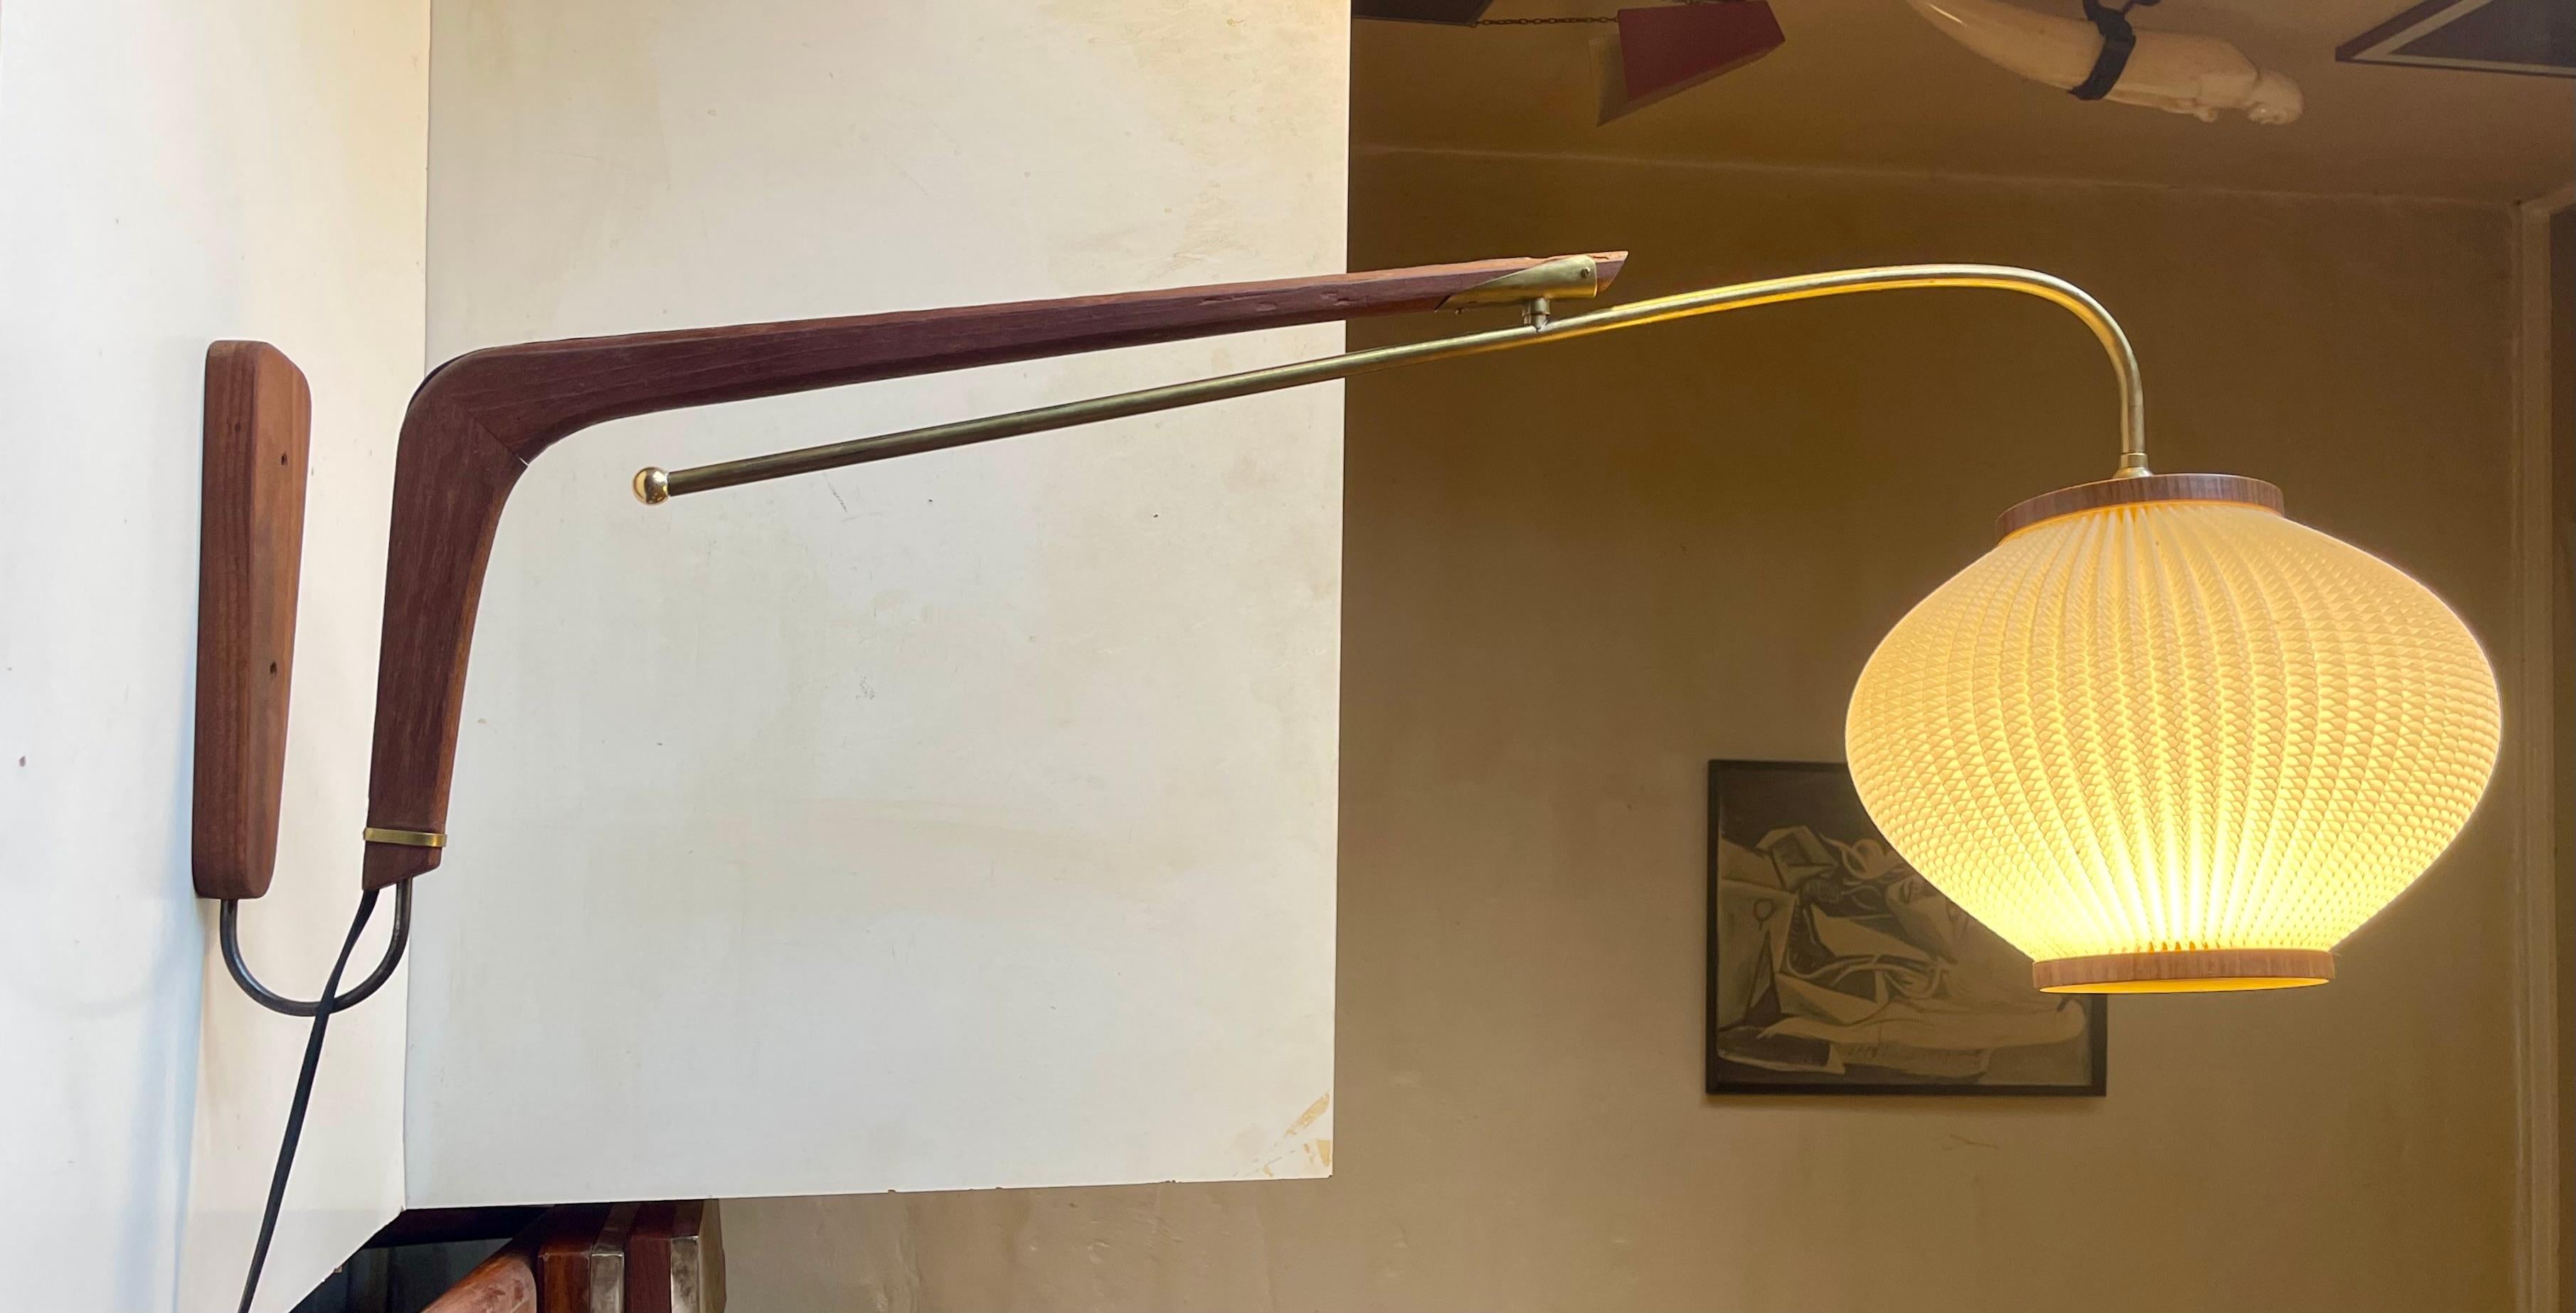 A rare large adjustable swing-arm wall sconce made from solid teak, brass components and an acrylic beehive shade. 180 degrees adjustable and adjustable at the shade. It was designed during the 1950s by Svend Aage Holm-Sørensen and made by his